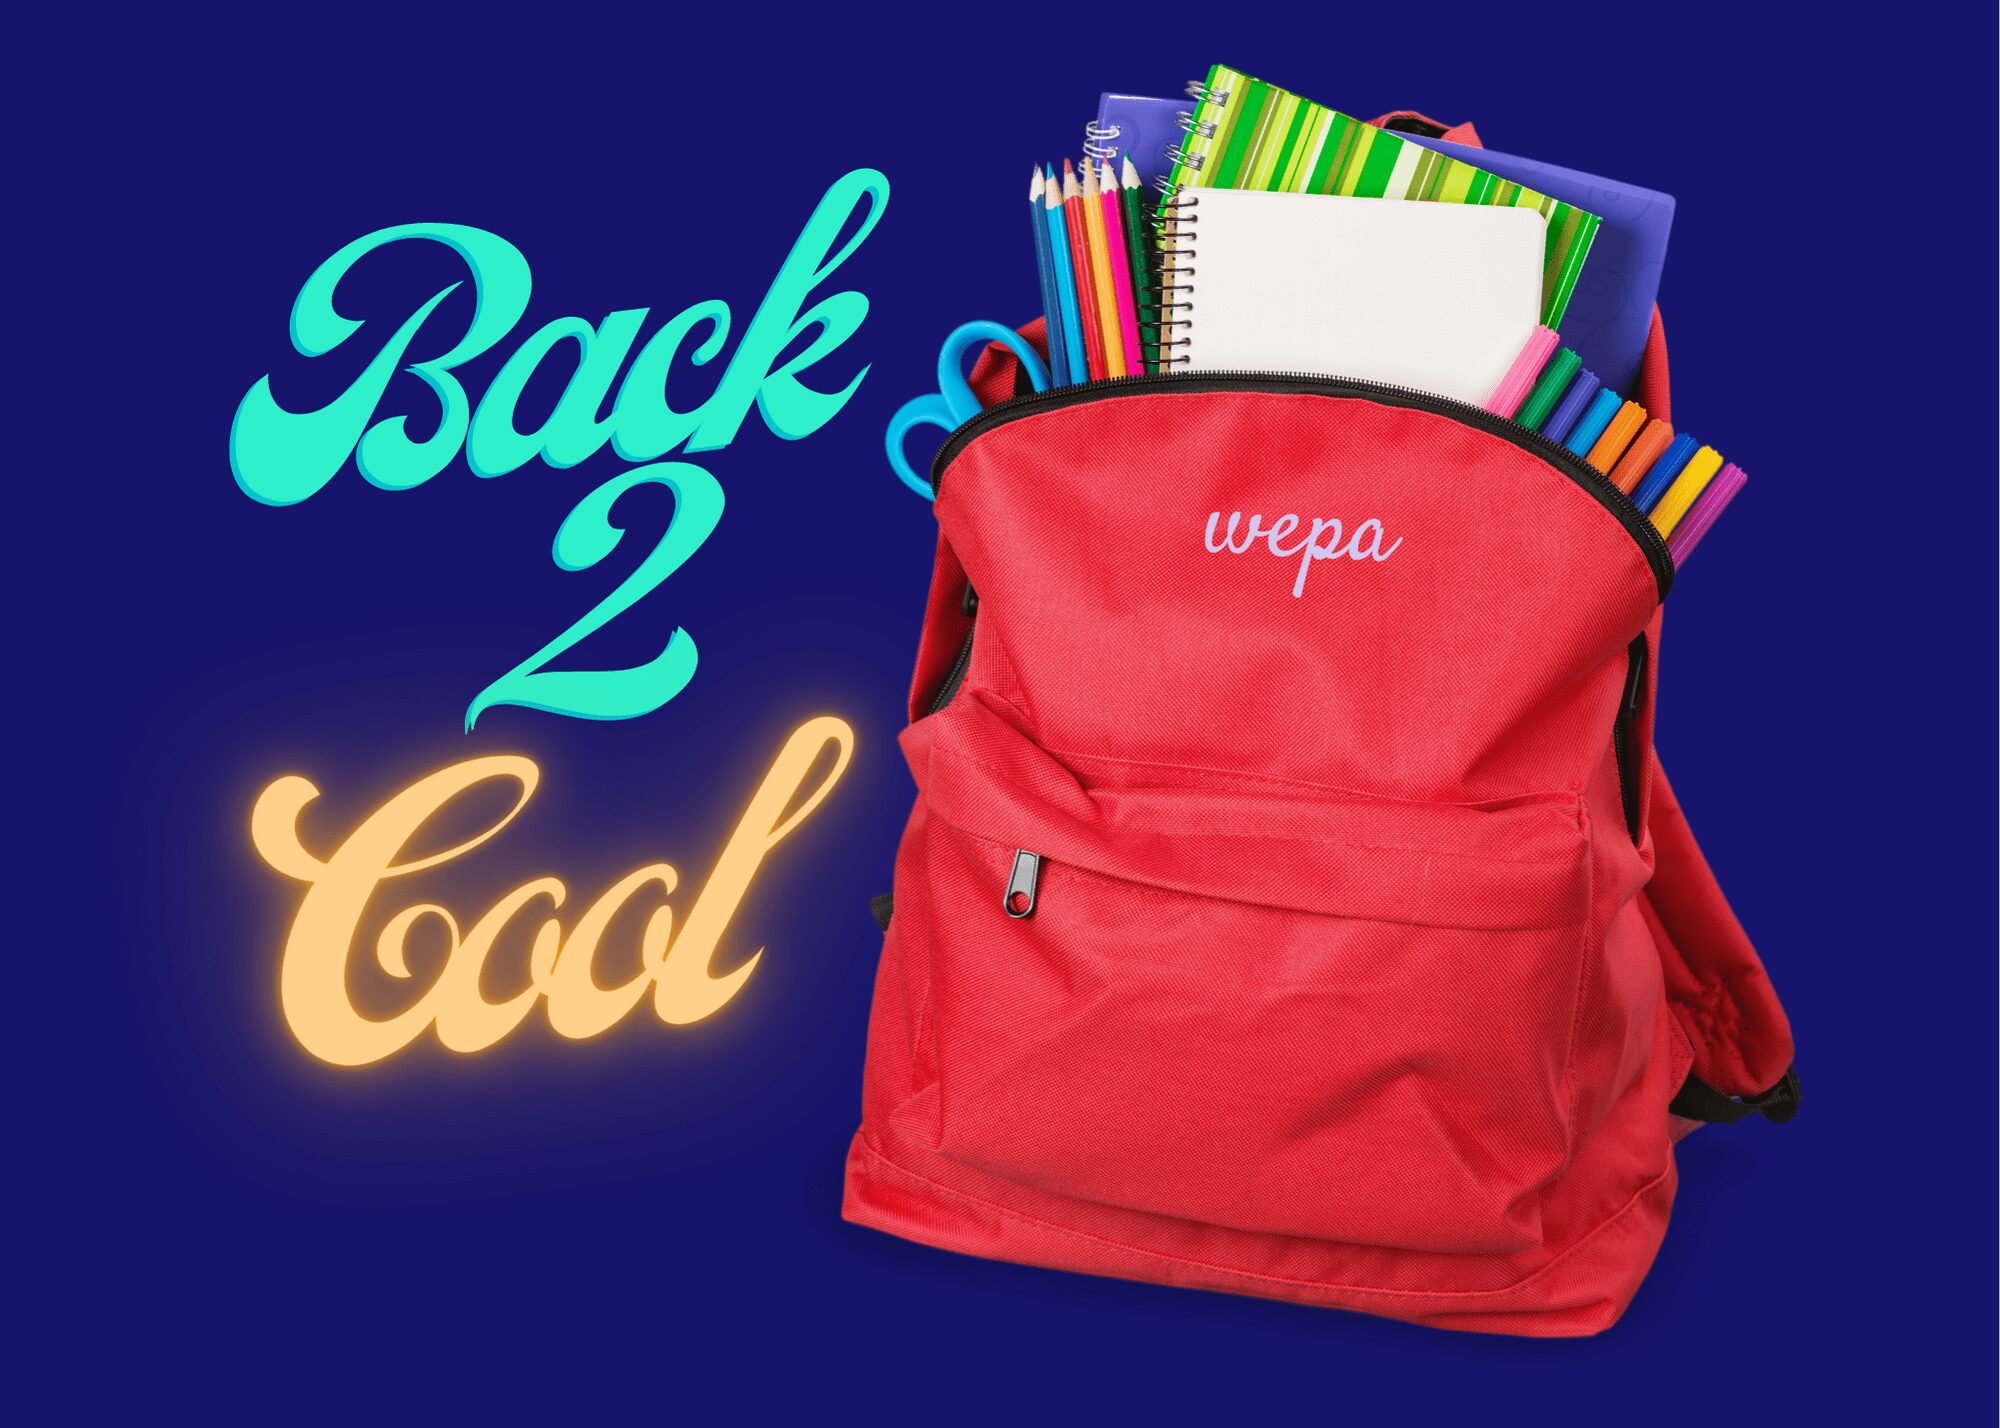 Back to Cool: “Latino-gram” Your Backpack